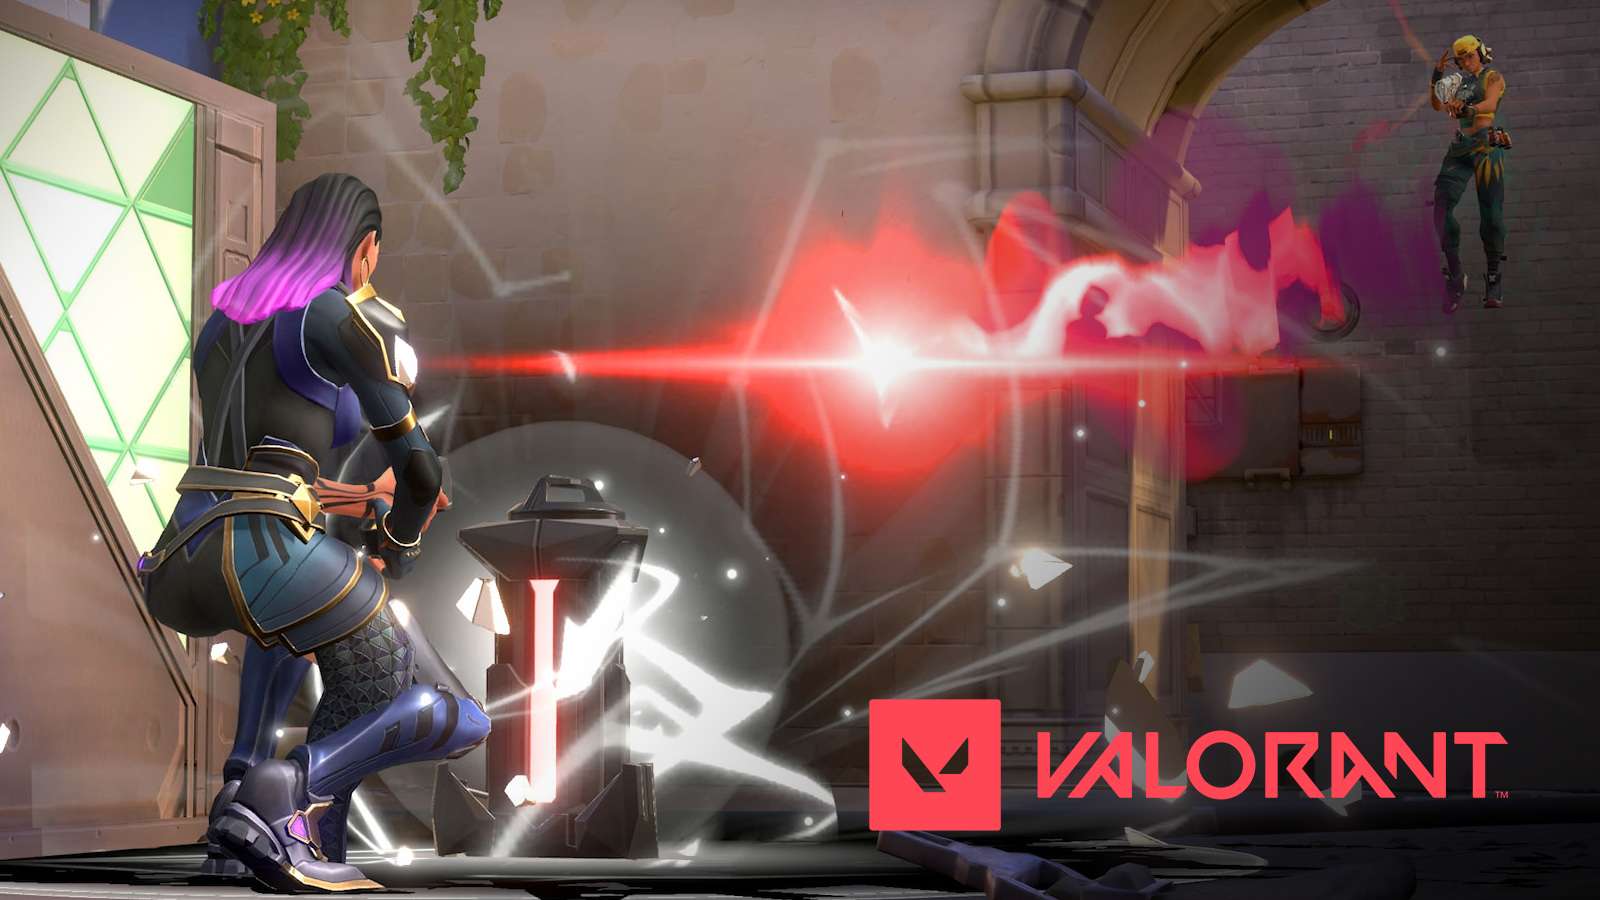 Reyna defusing Spike with Raze shooting Showstopper in Valorant.